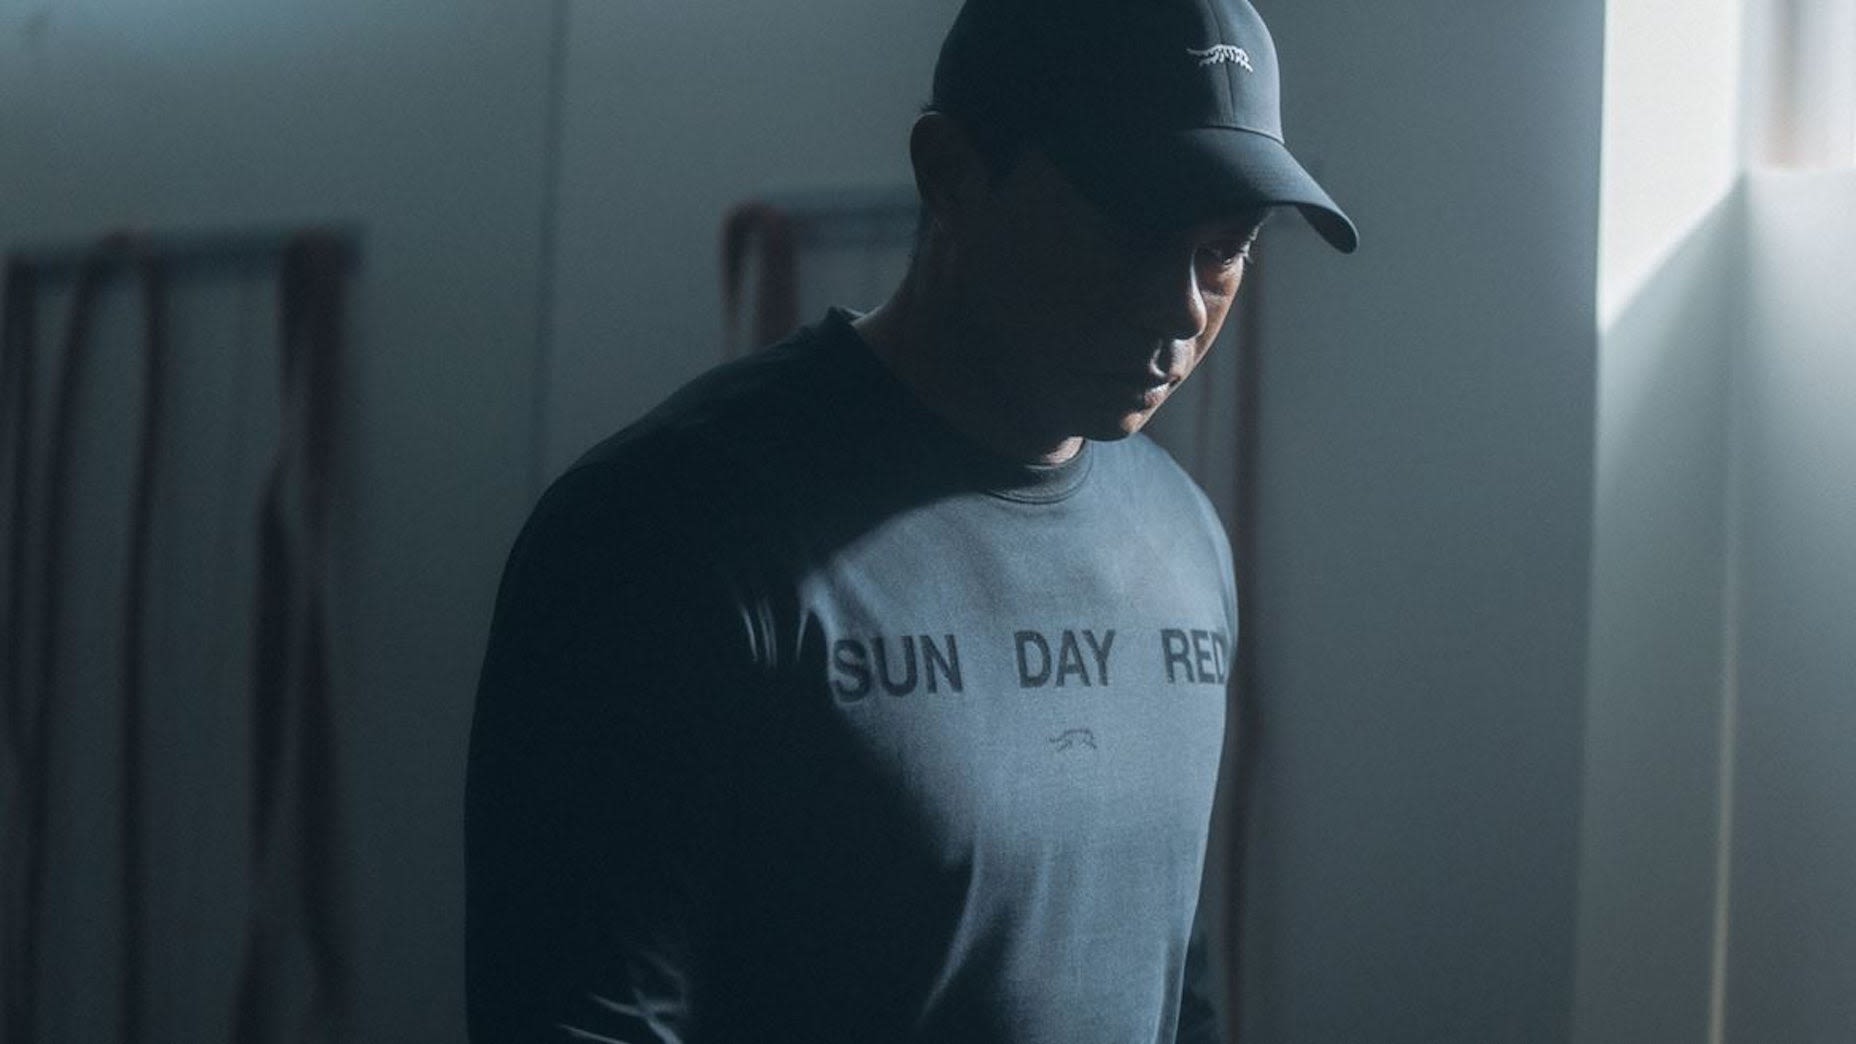 Tiger Woods’ Sun Day Red line is now available: What you need to know